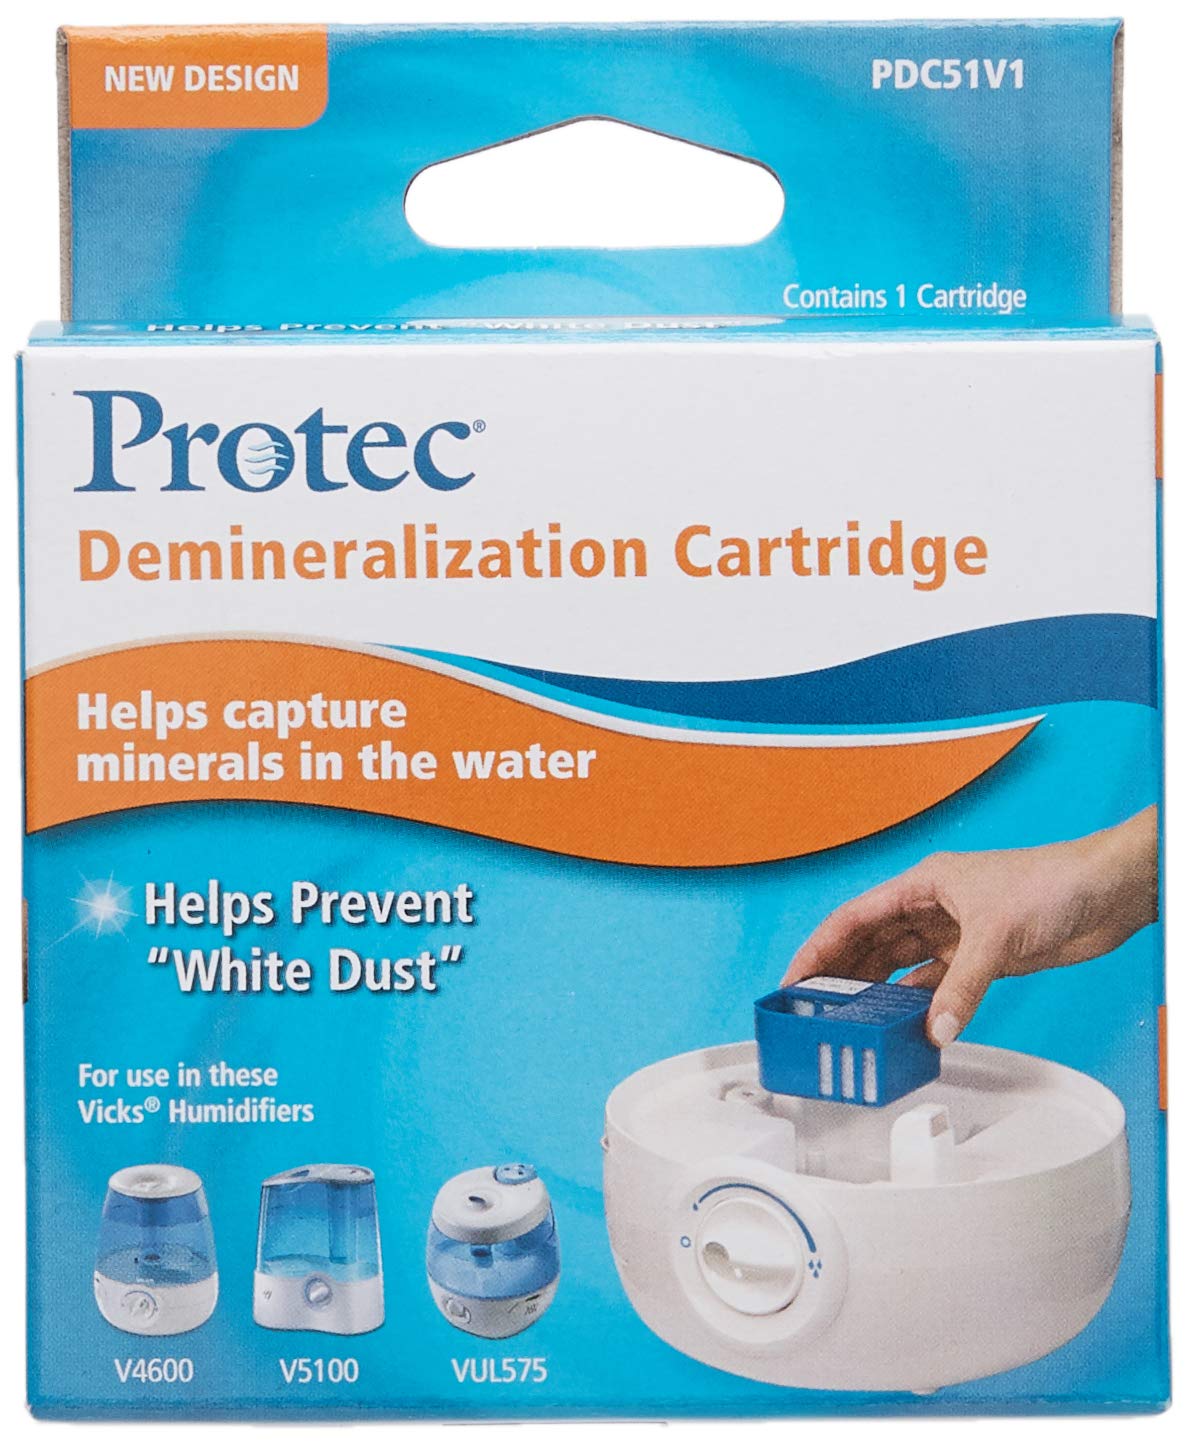 Protec Demineralization Cartridge, Pack of 1, Blue, PDC51V1 - Demineralization Cartridge for Humidifier Works to Collect White Dust